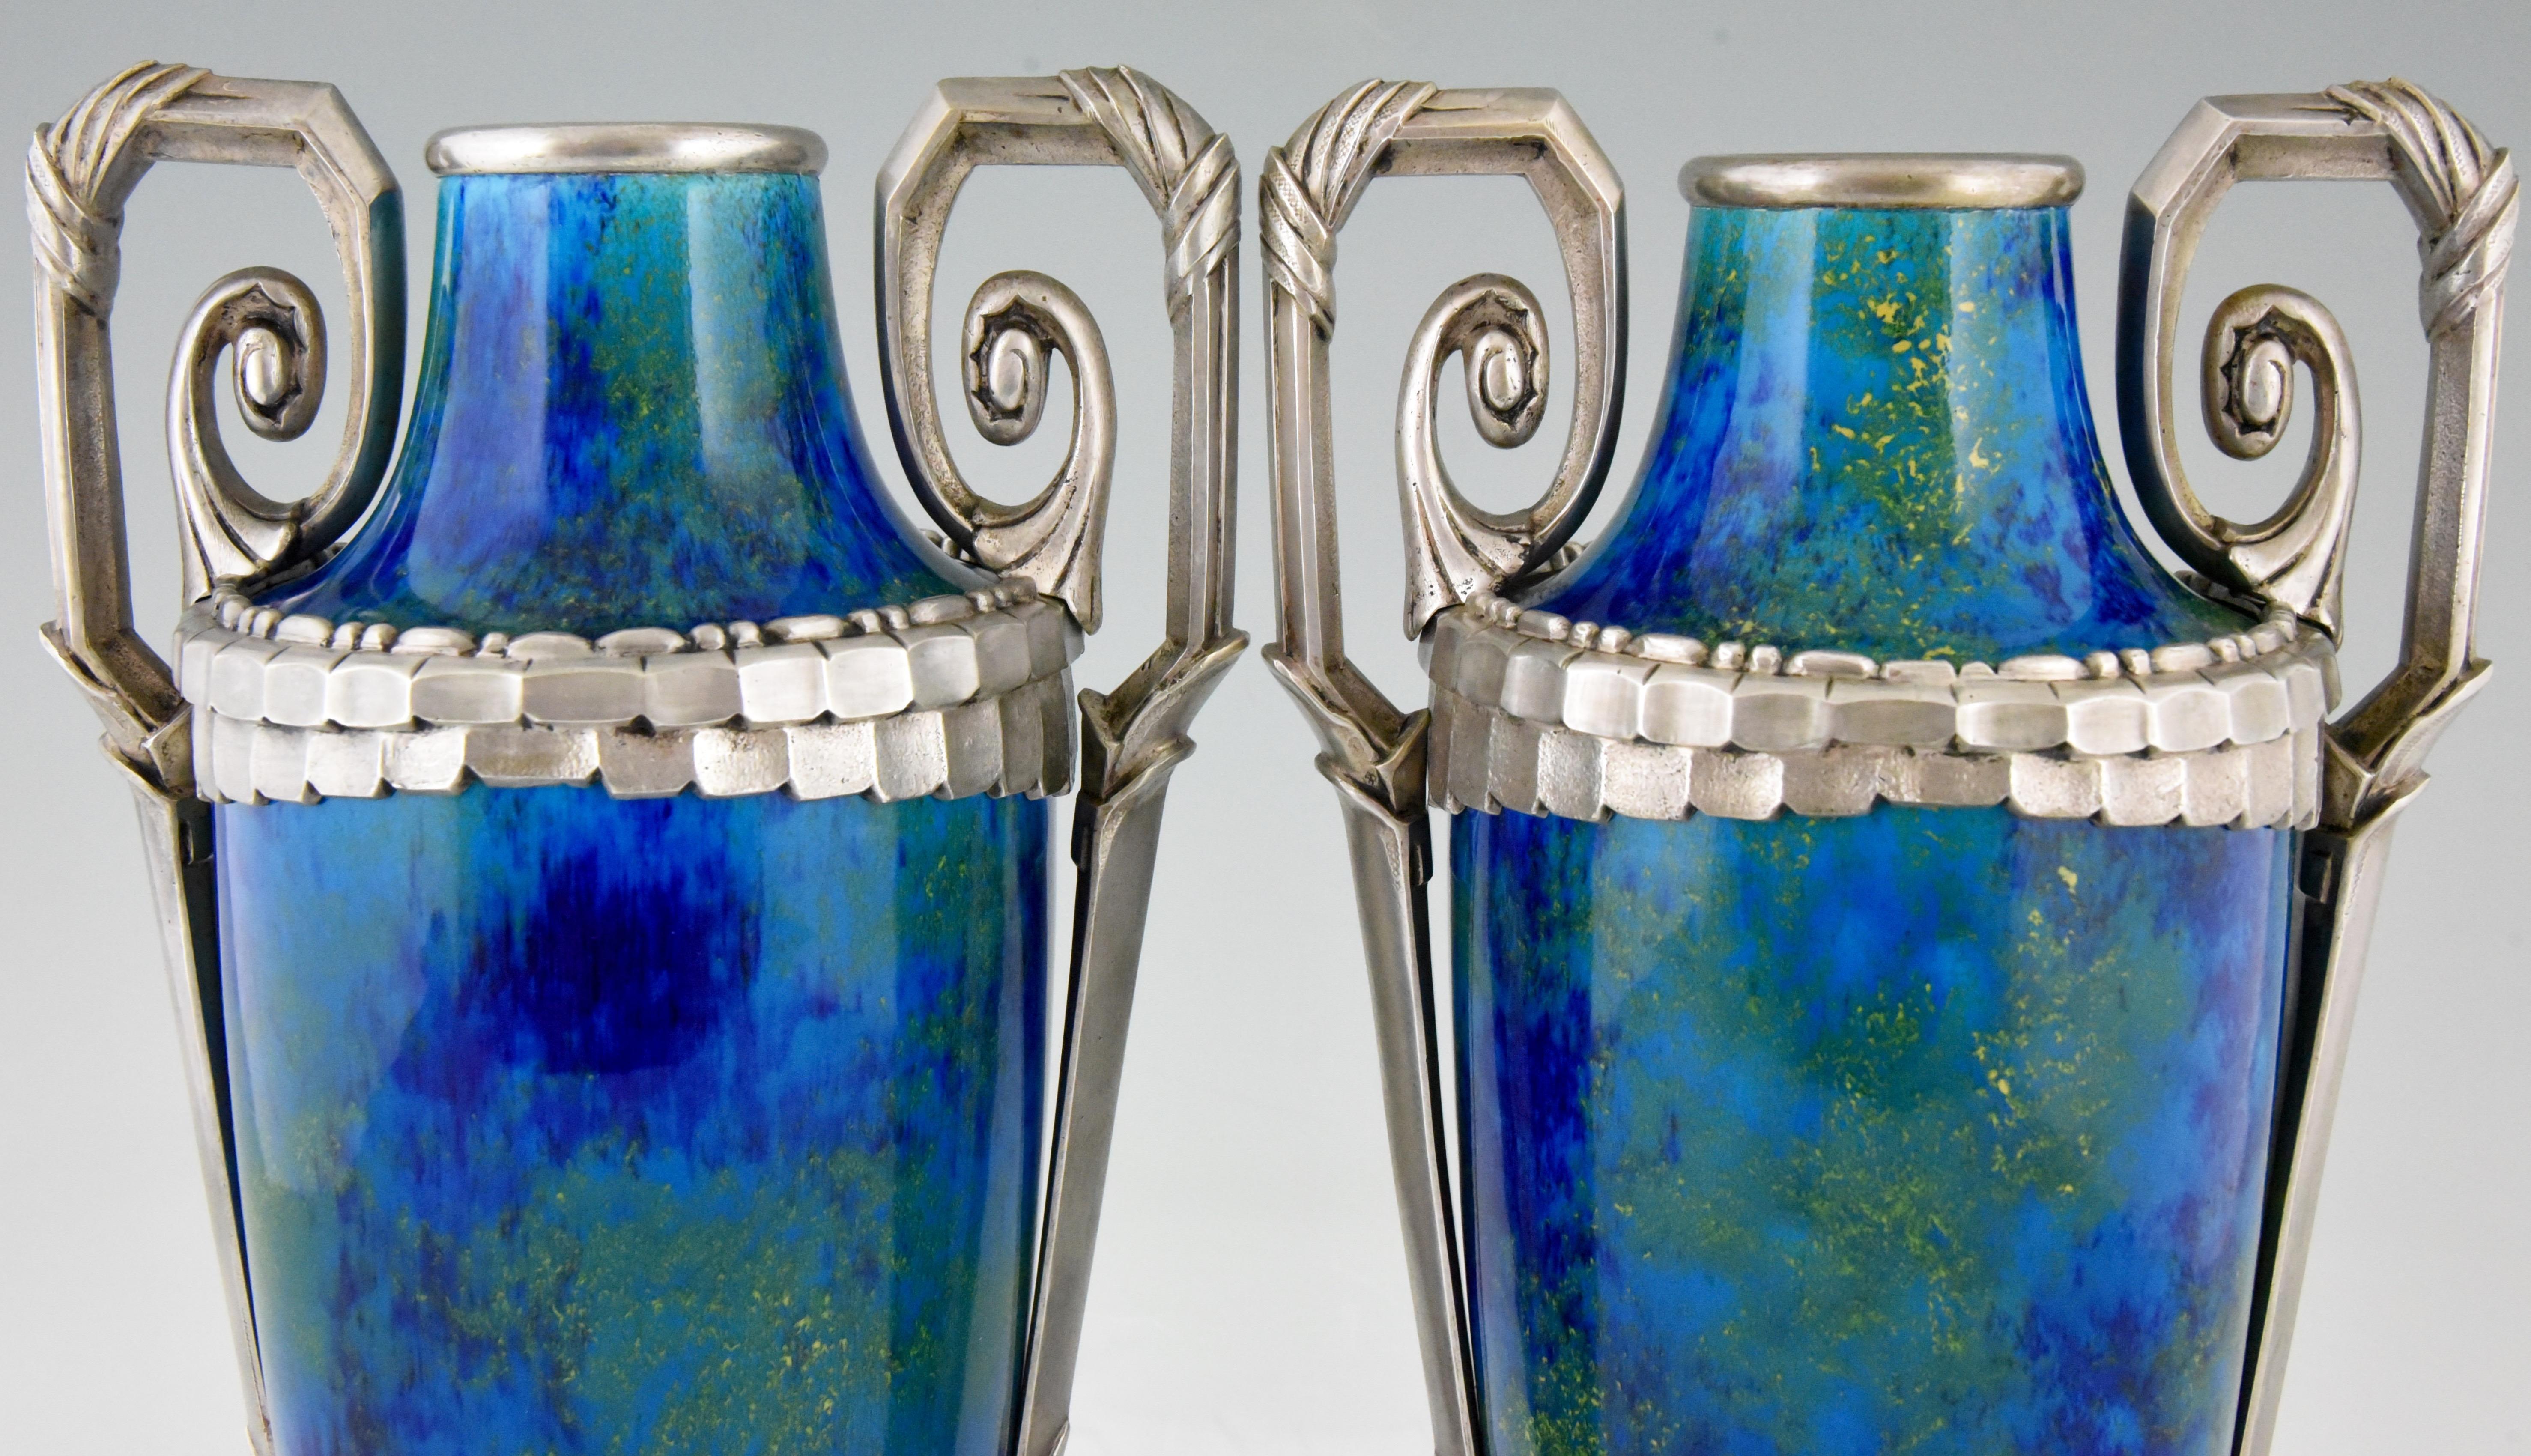 Pair of Art Deco Blue Ceramic and Bronze Vases Paul Milet for Sevres 1920 France 5